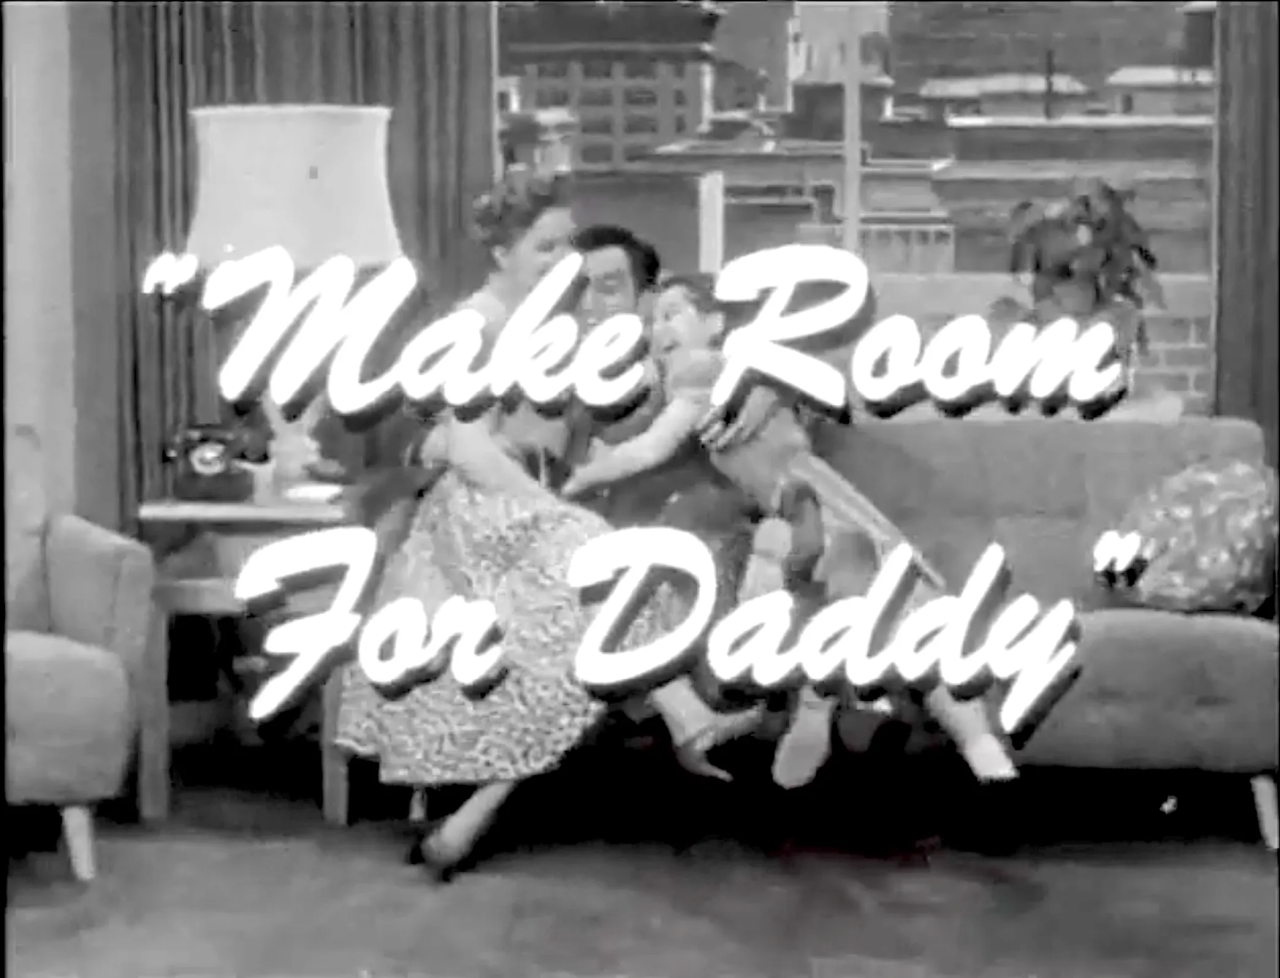 what did make room for daddy abc cbs 1953 64 mean